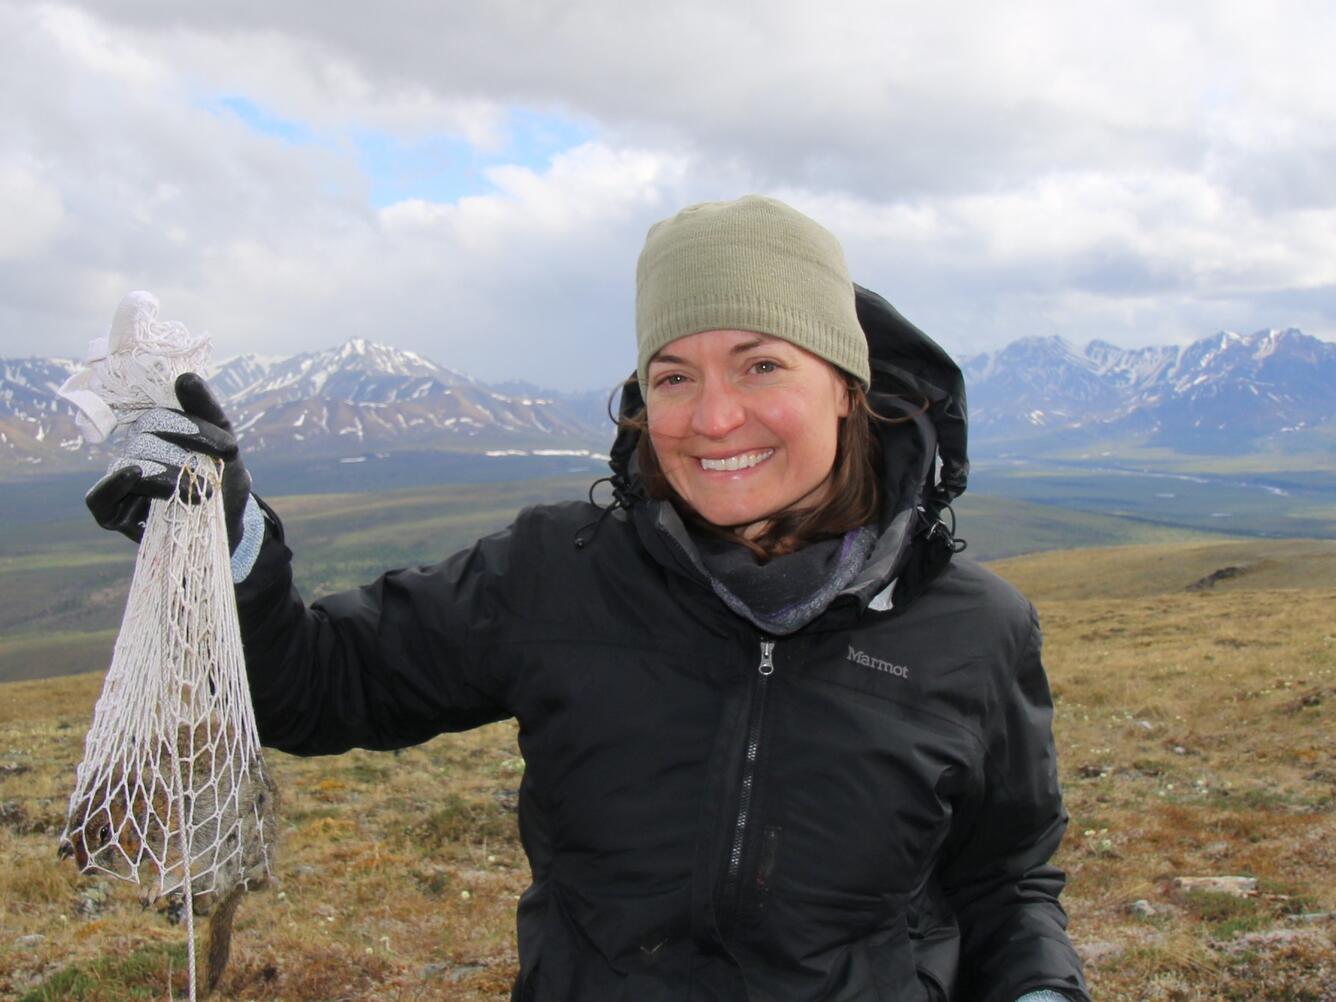 Woman in a coat standing on a plain with mountains in the background. She is holding something in a net.